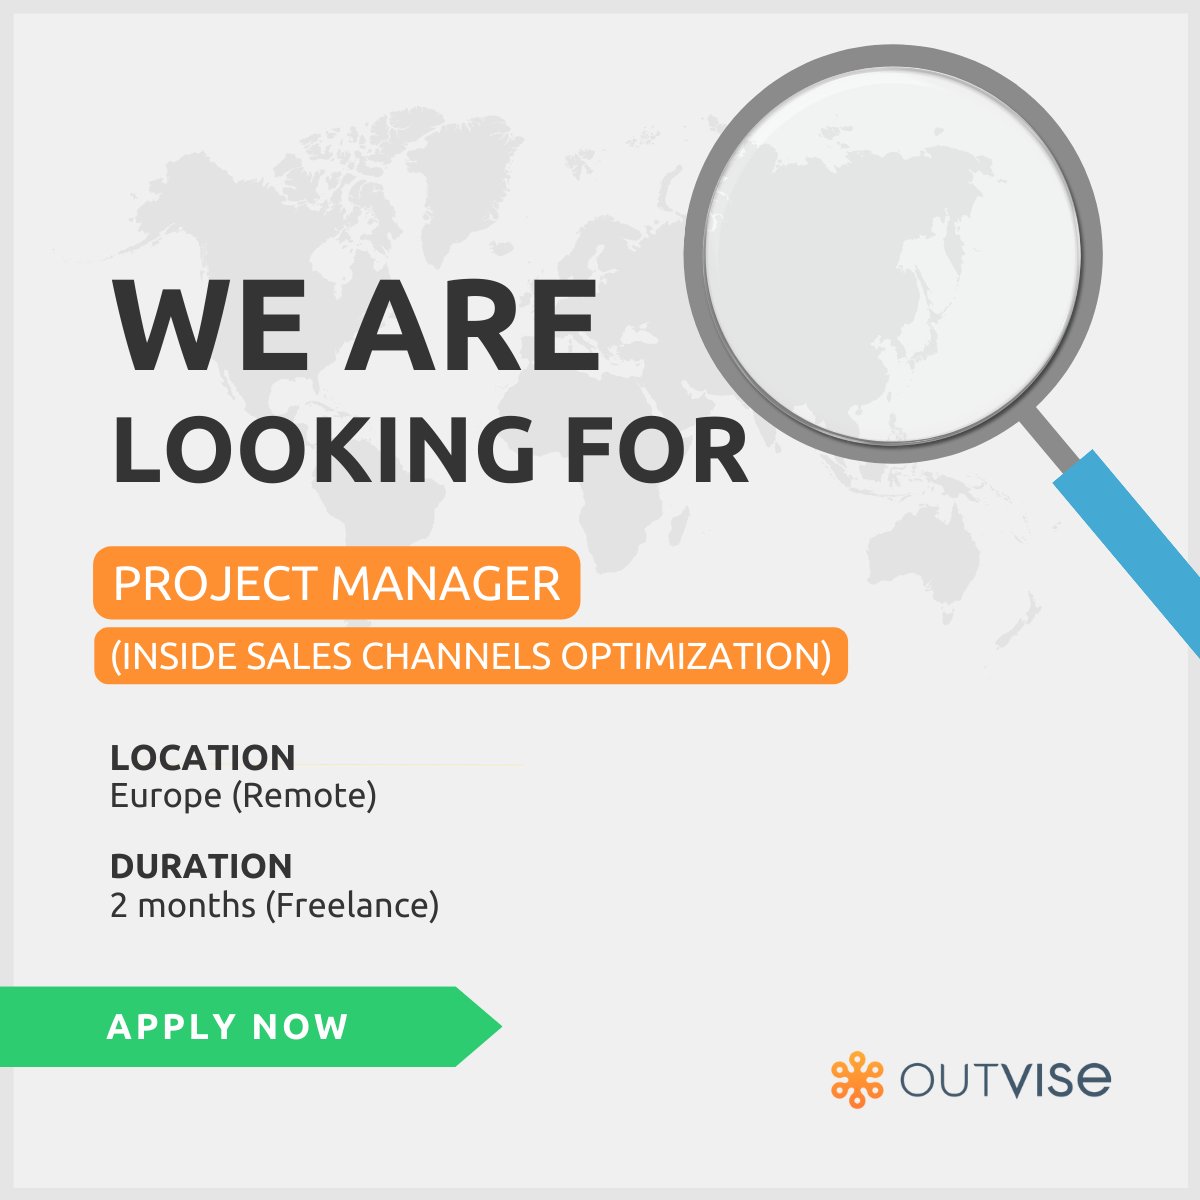 Our client is seeking an Project Manager (Inside Sales Channels optimization). 🔎

Apply here 👉 outvise.com/sl/jV73AFIQX8

#OutviseProjects #Freelance #Hiringnow #Europe